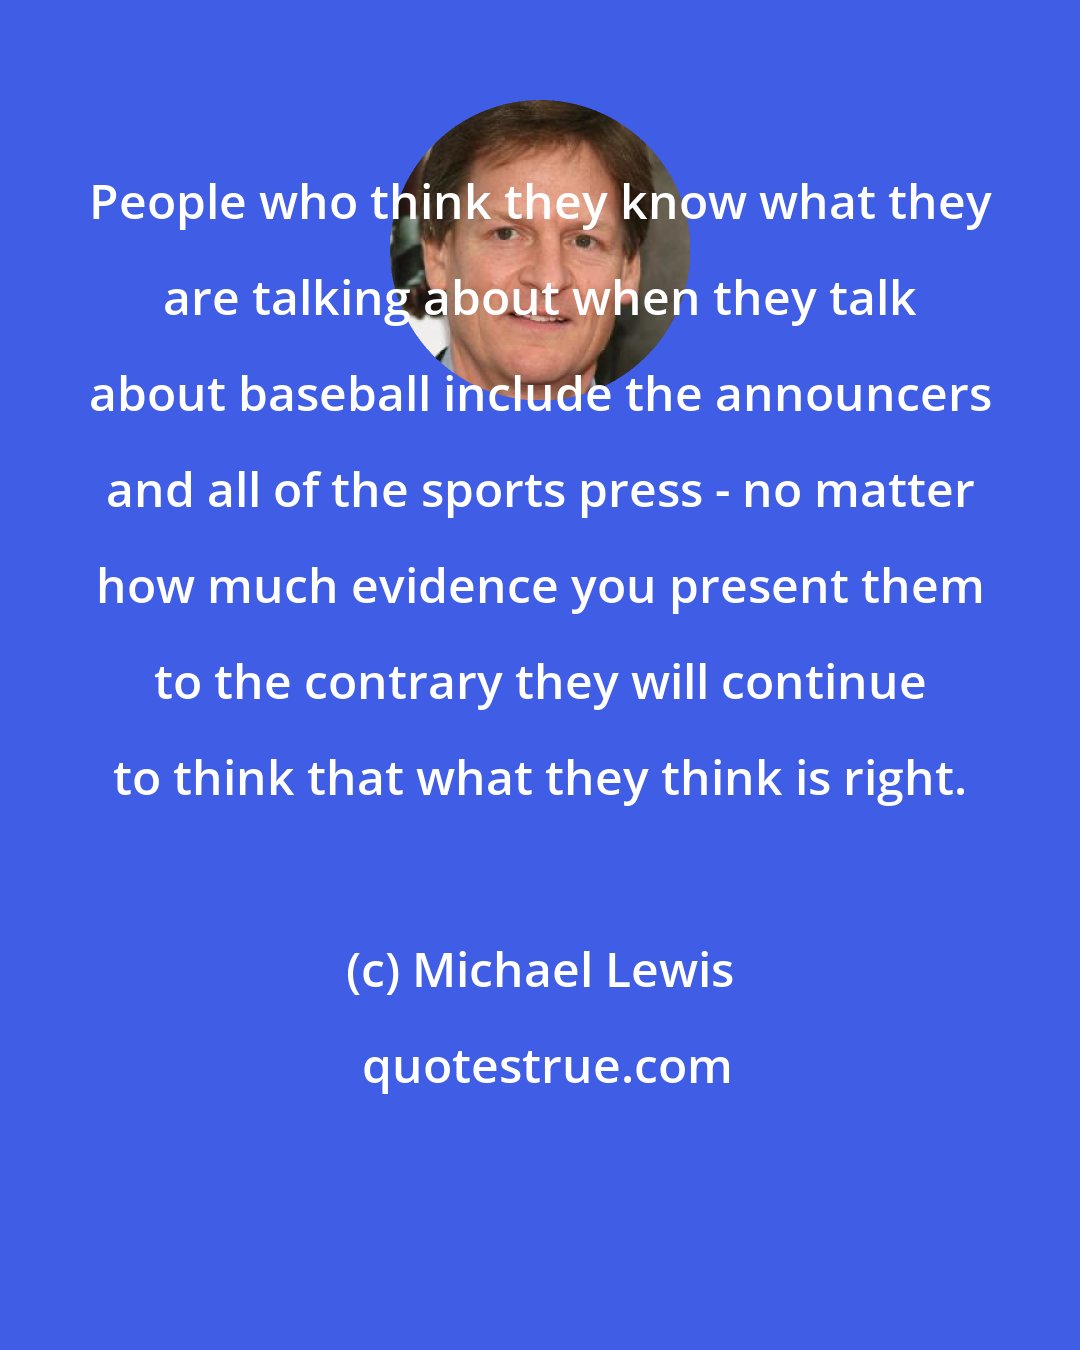 Michael Lewis: People who think they know what they are talking about when they talk about baseball include the announcers and all of the sports press - no matter how much evidence you present them to the contrary they will continue to think that what they think is right.